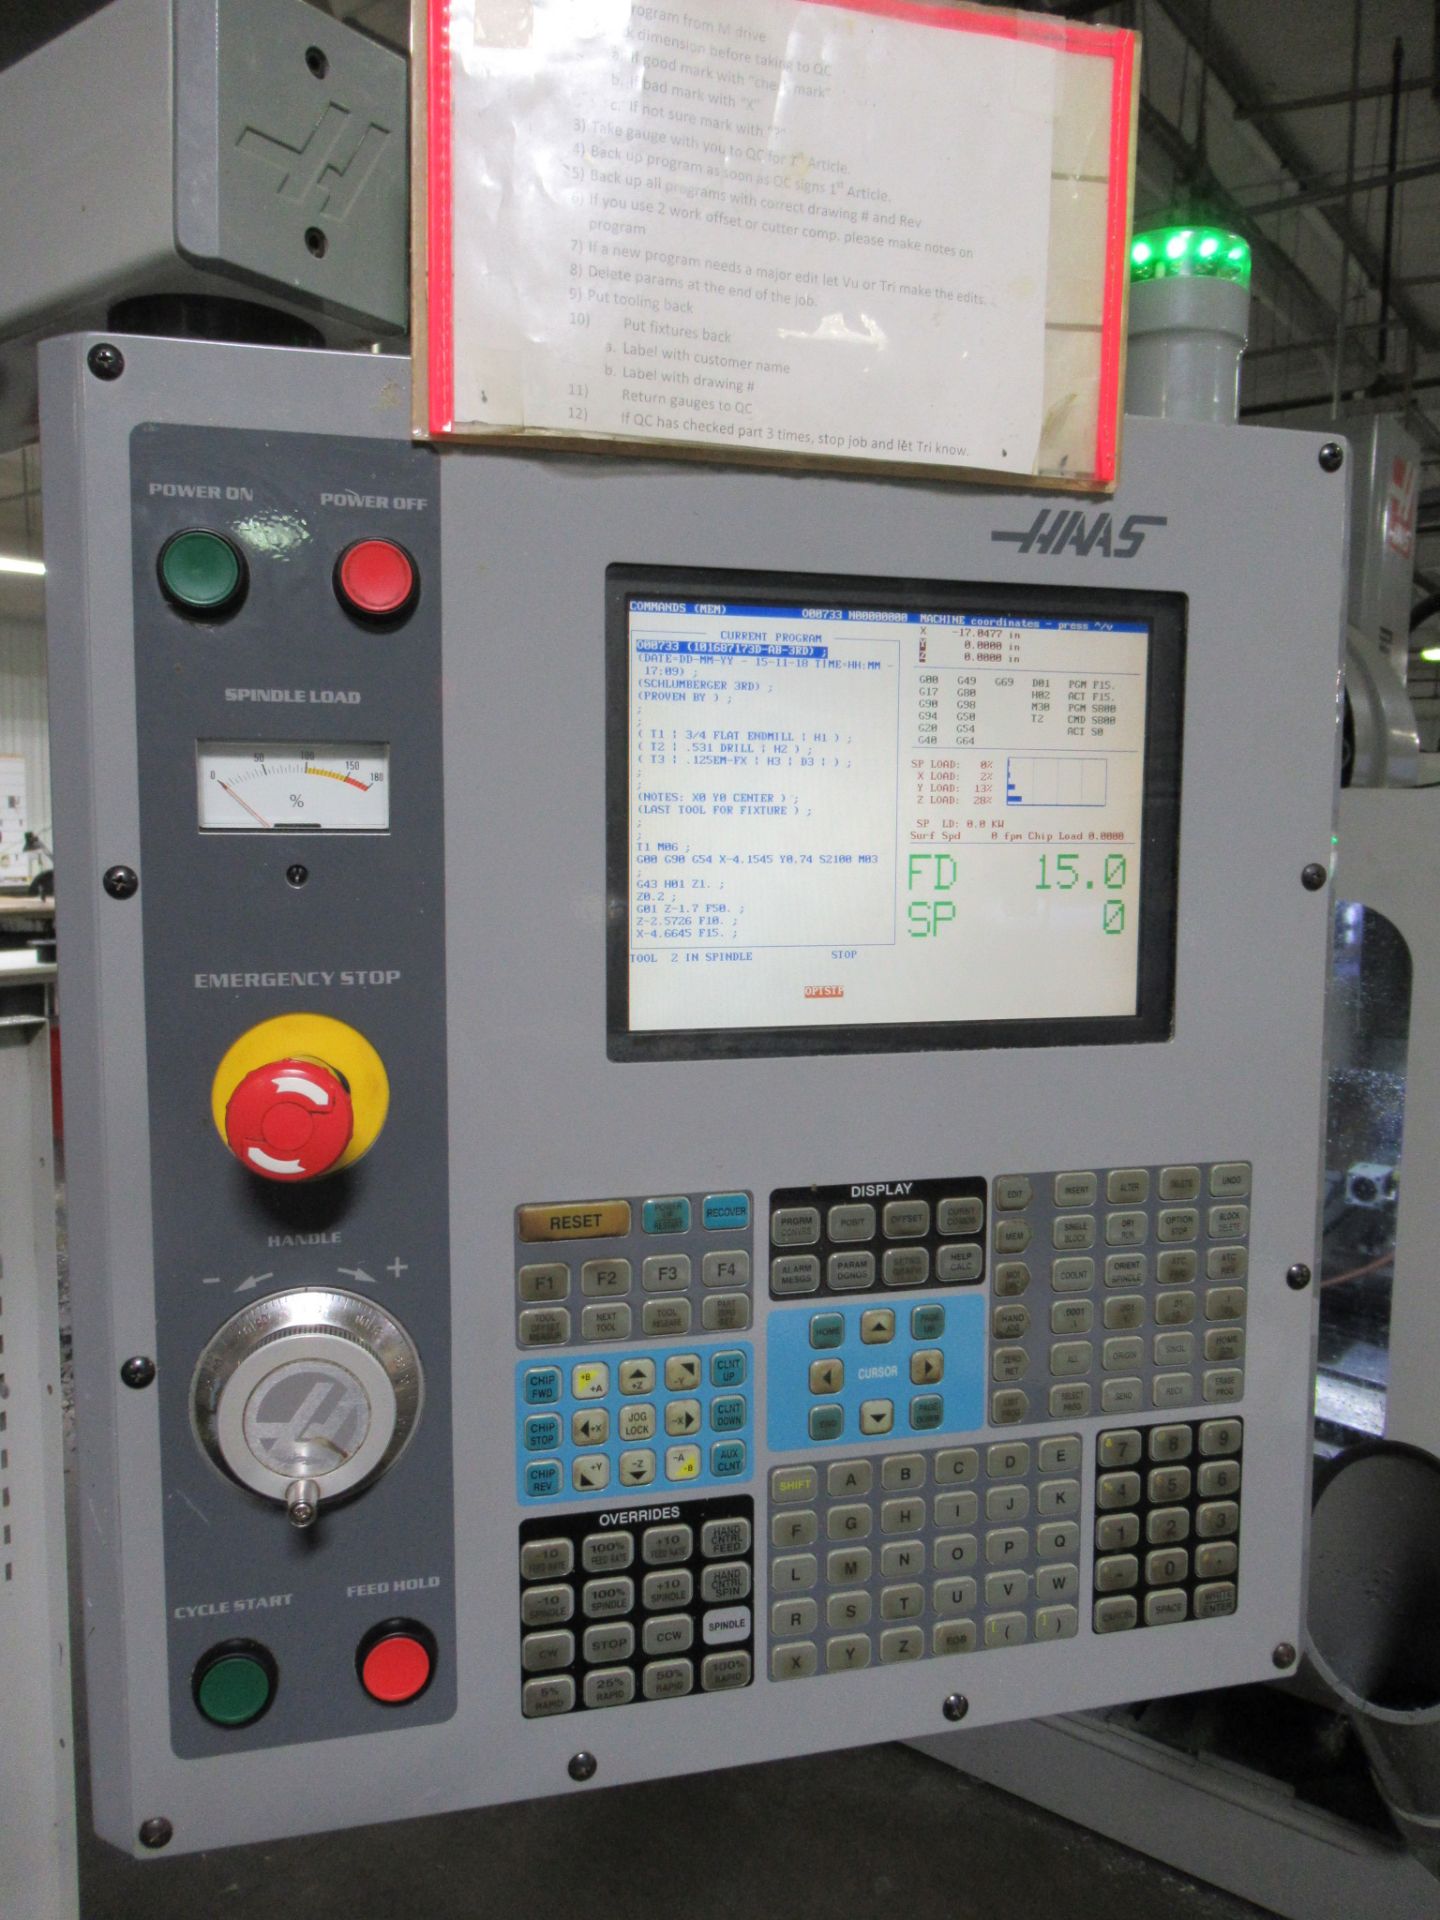 CNC TOOLROOM LATHE, HAAS MDL. TM2, new 2006, Haas CNC control, 57.75" x 10.75" table, 40" X-axis - Image 2 of 4